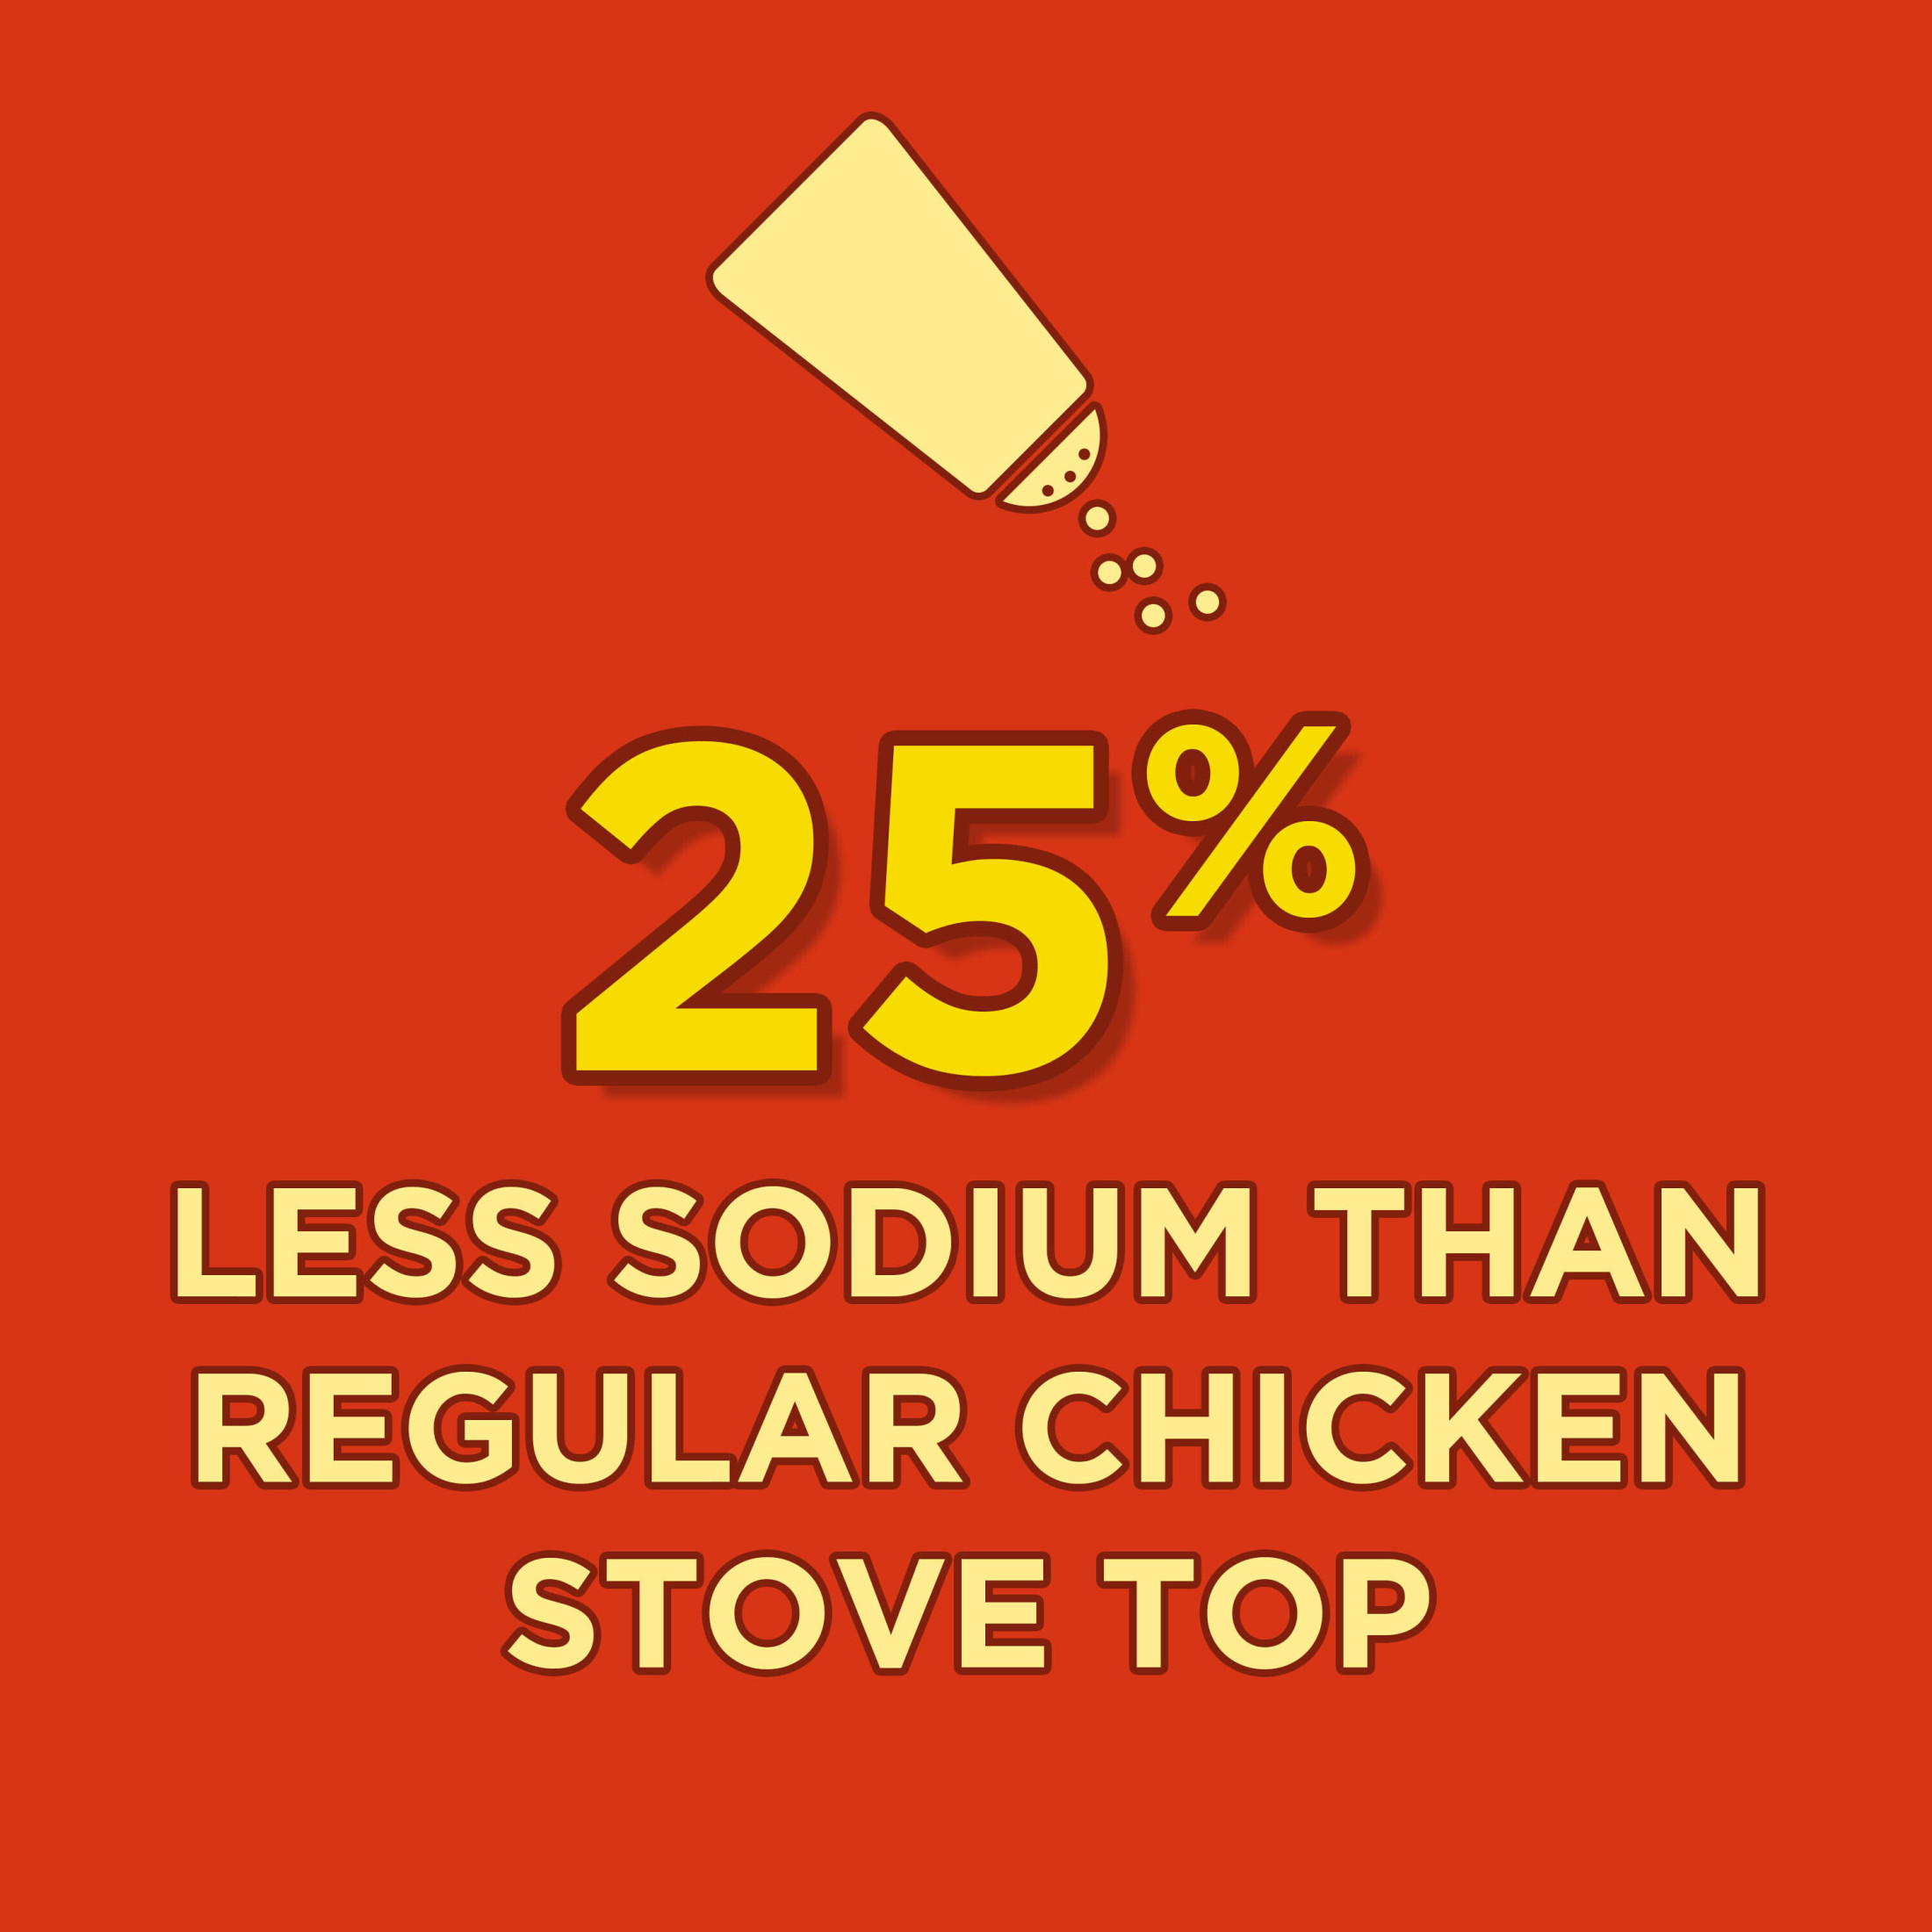 Stove Top Low Sodium Chicken Stuffing Mix Side Dish with 25% Less Sodium, 6 oz Box - image 3 of 8